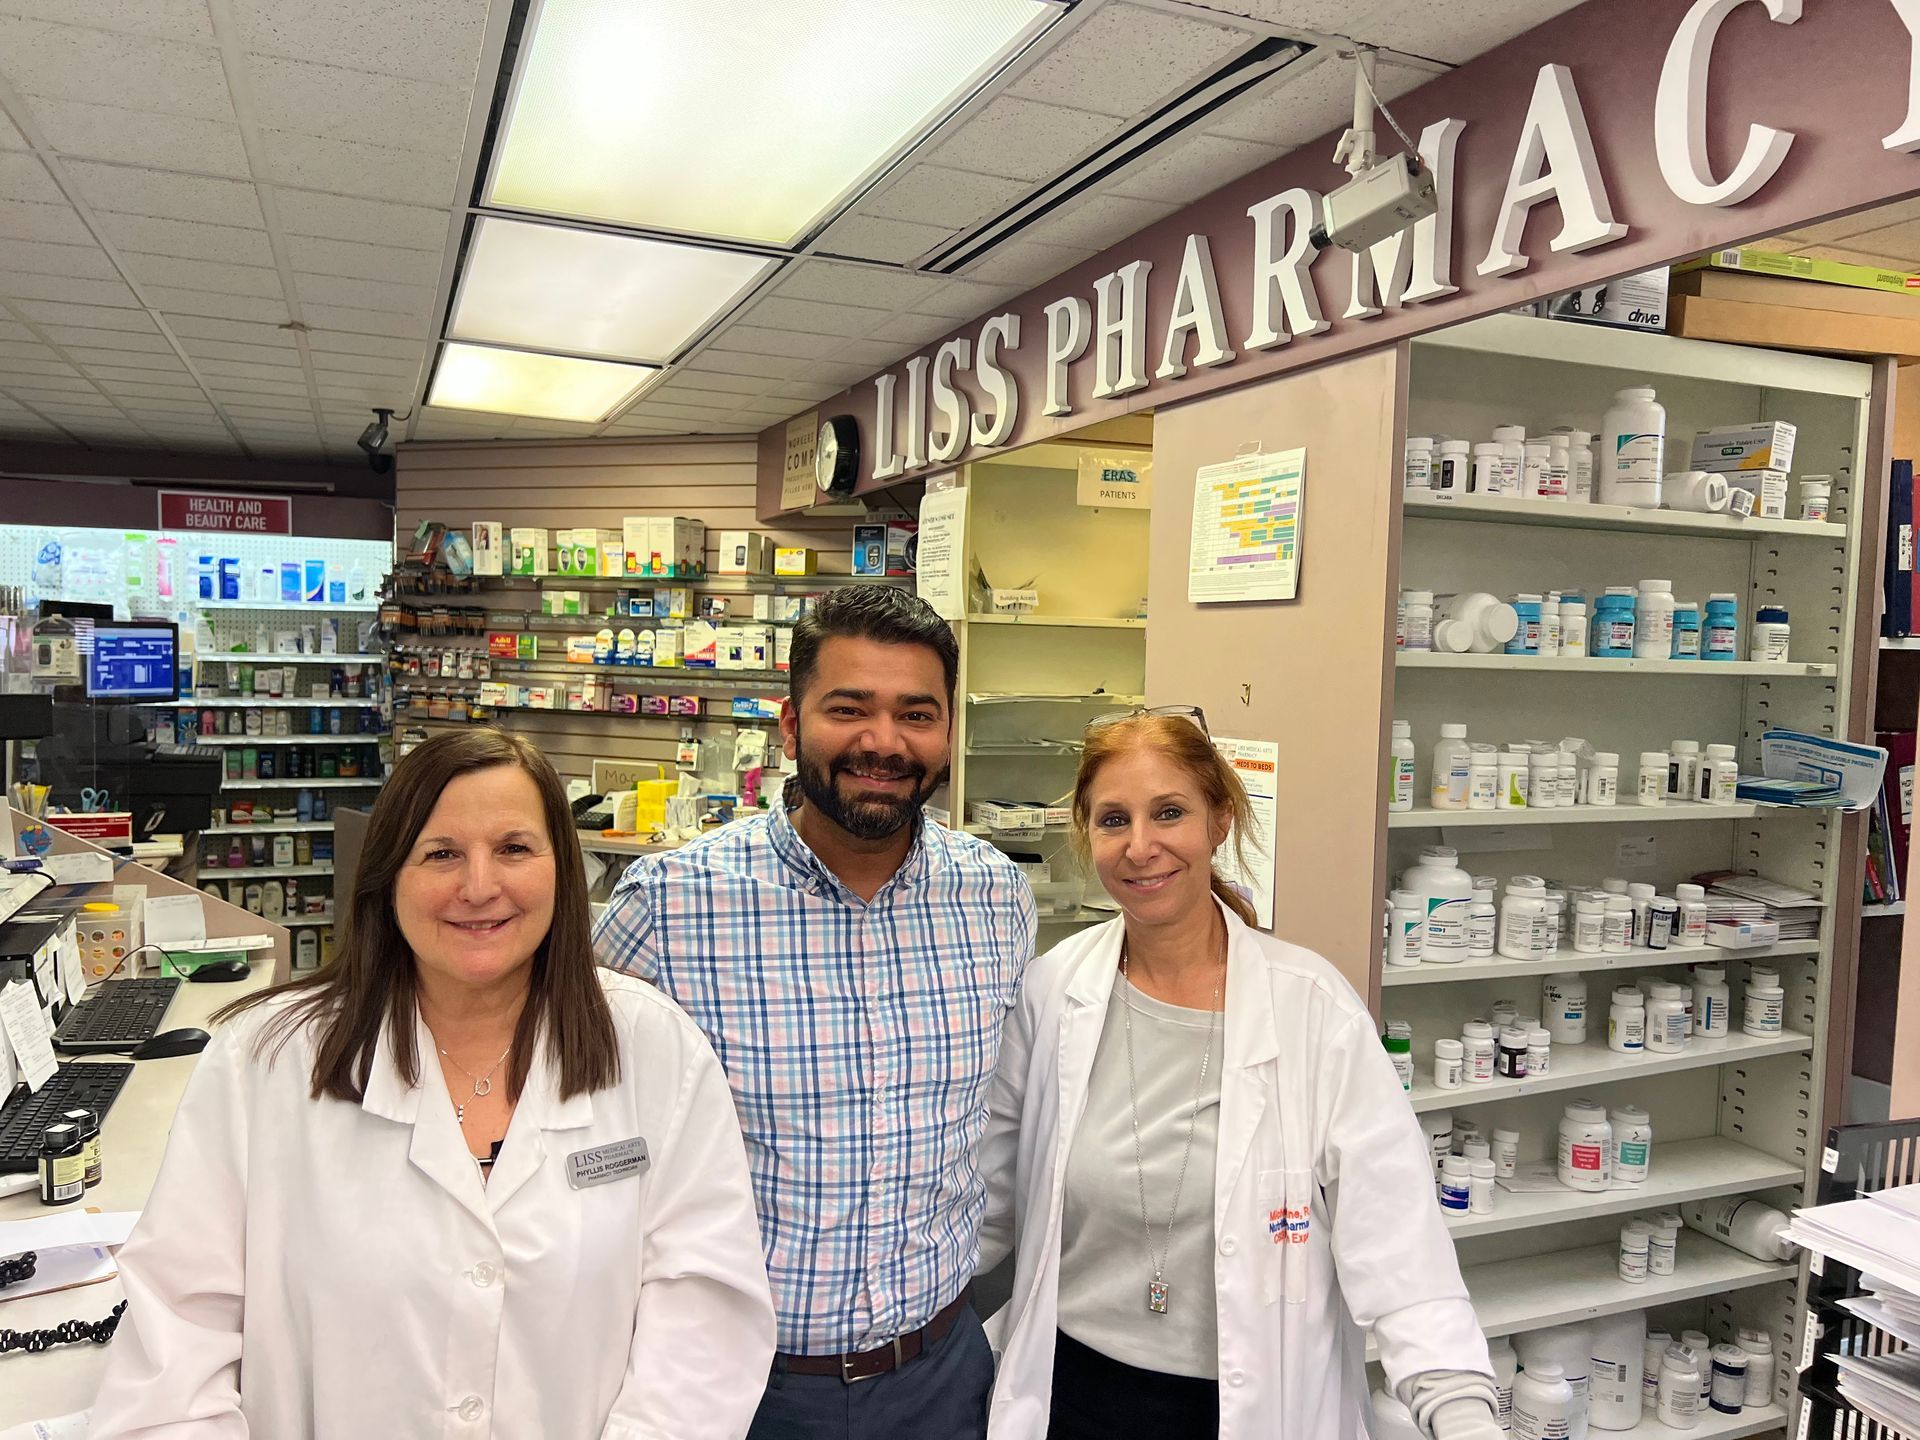 Friendly Pharmacists are posing for a picture in a pharmacy.